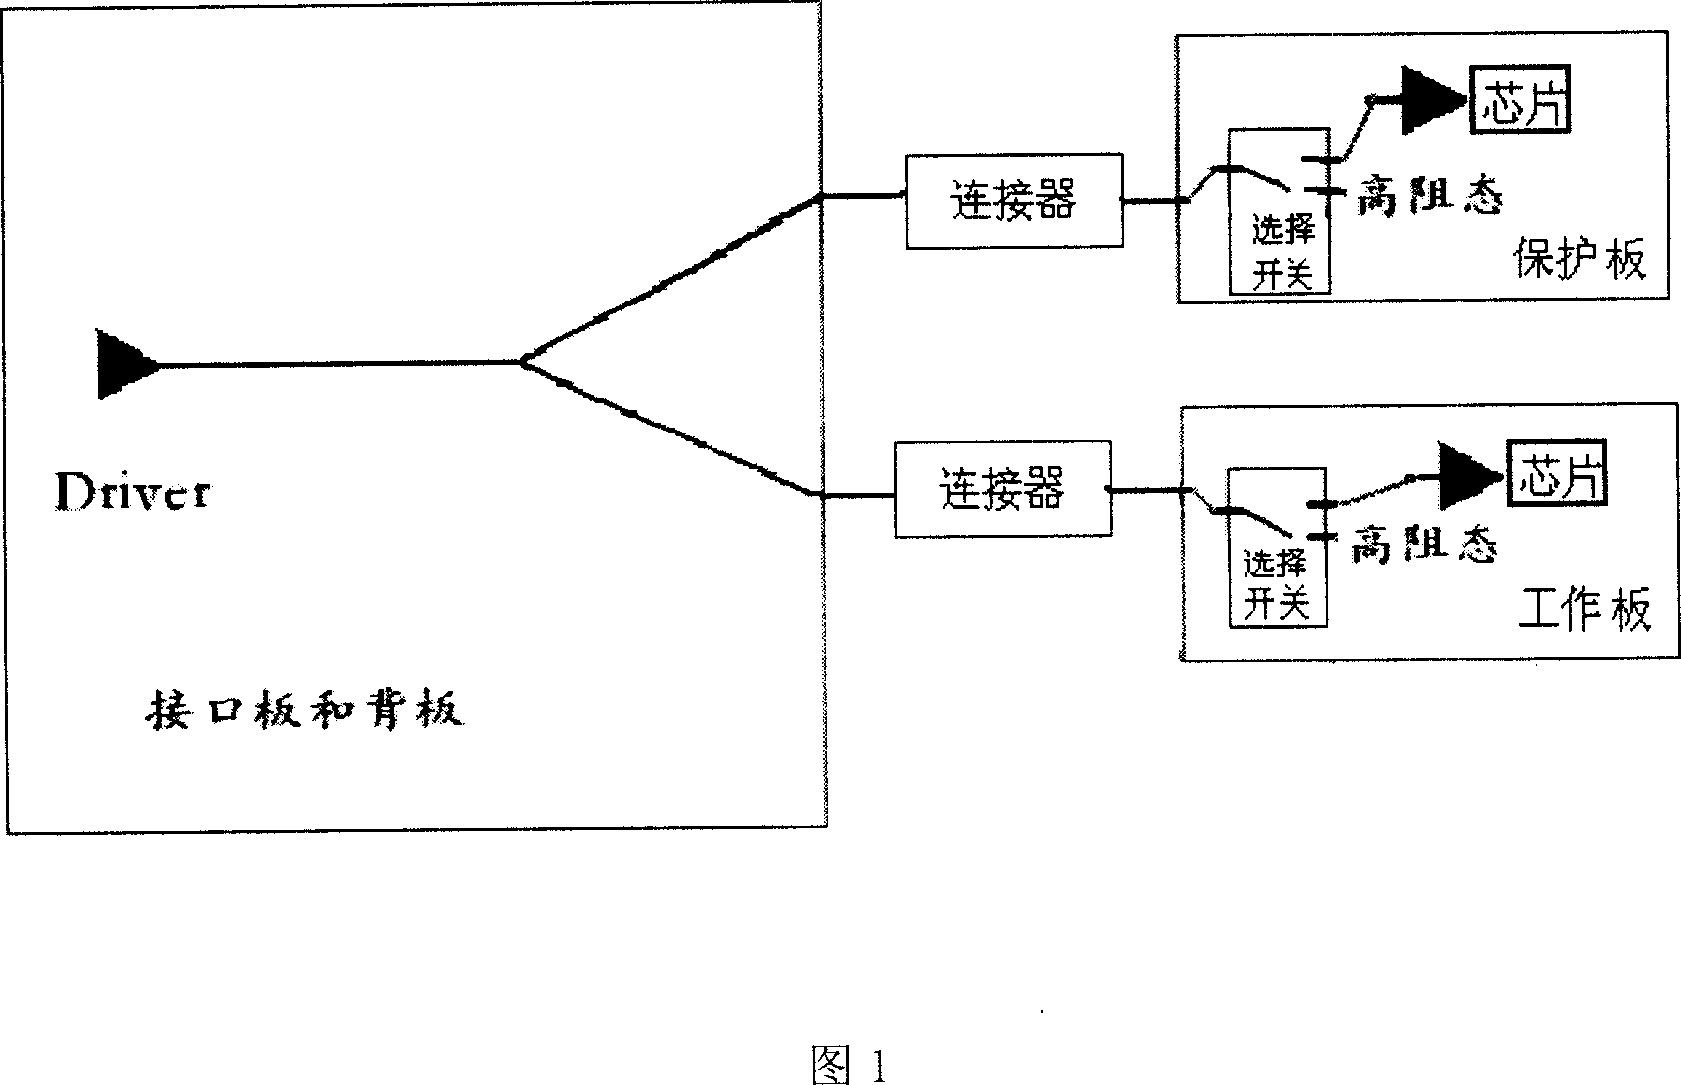 Branch protection negater circuit